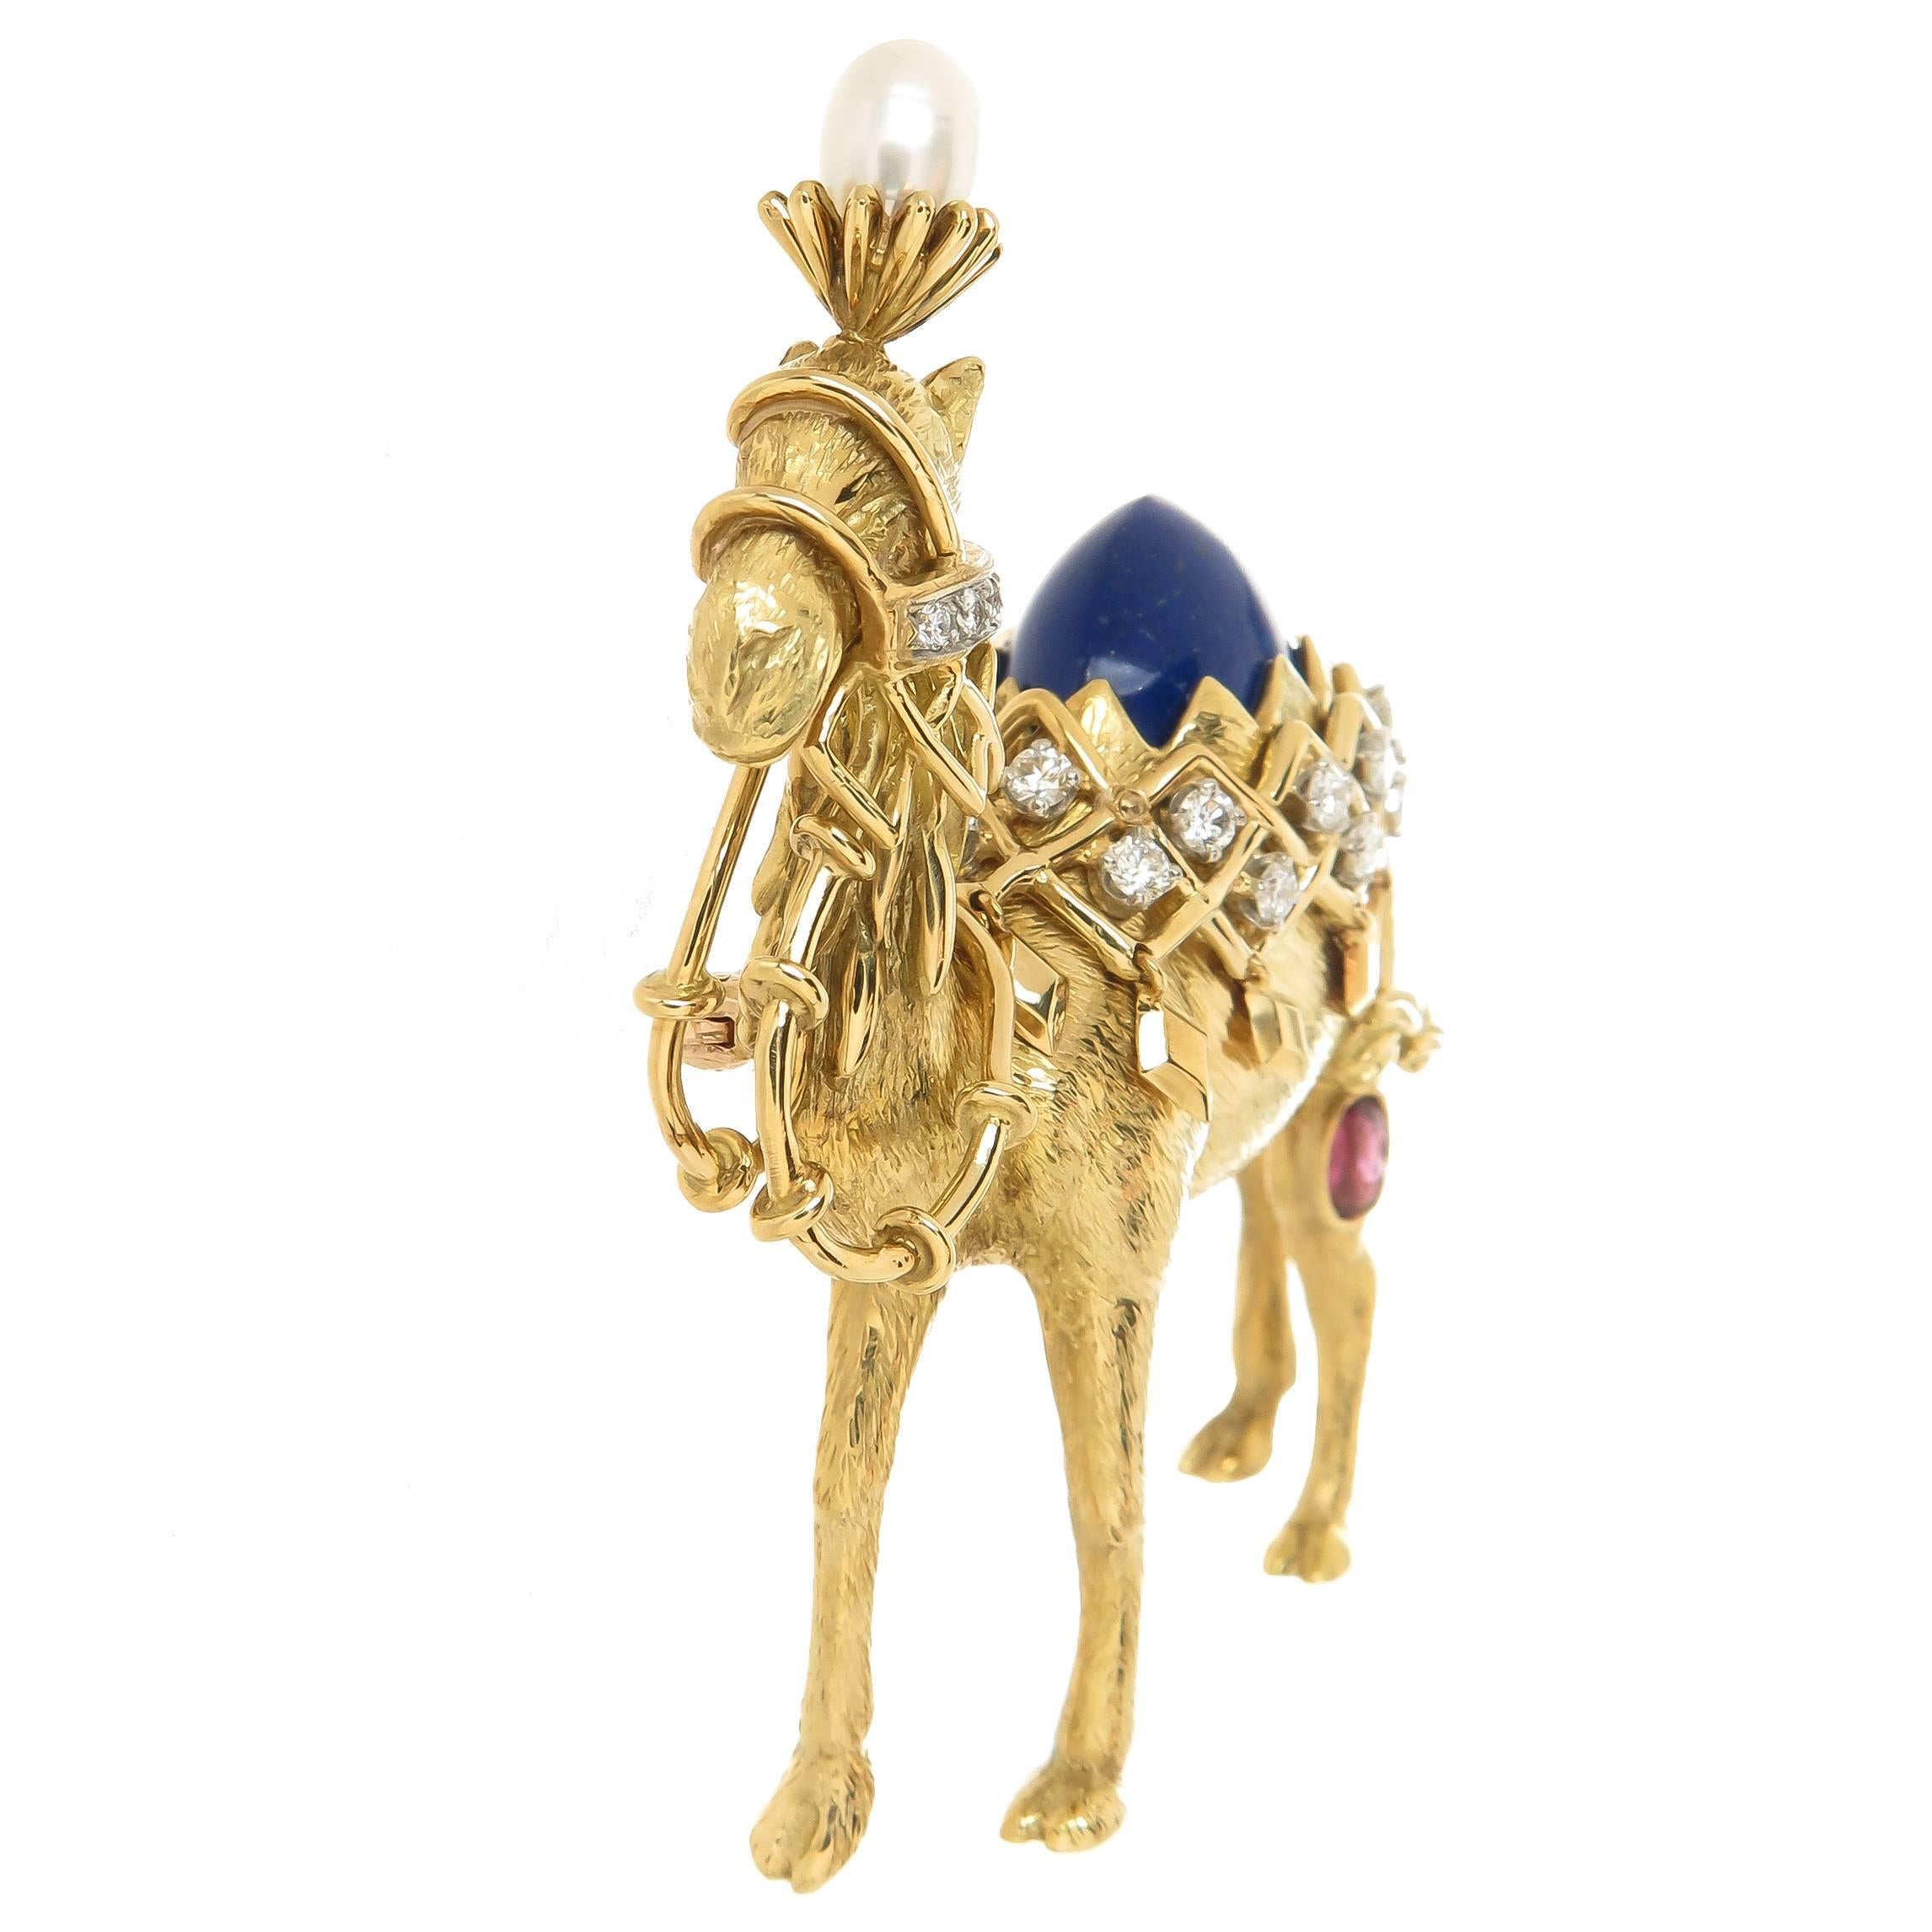 Circa 1980 Jean Schlumberger for Tiffany & Company Camel Brooch, one of the more scarce and Iconic pieces or whimsical sculpture jewelry by Schlumberger.  18K Yellow Gold and measuring 2 3/8 inch in height  X  2 1/4 inch in length  X  3/4 inch wide